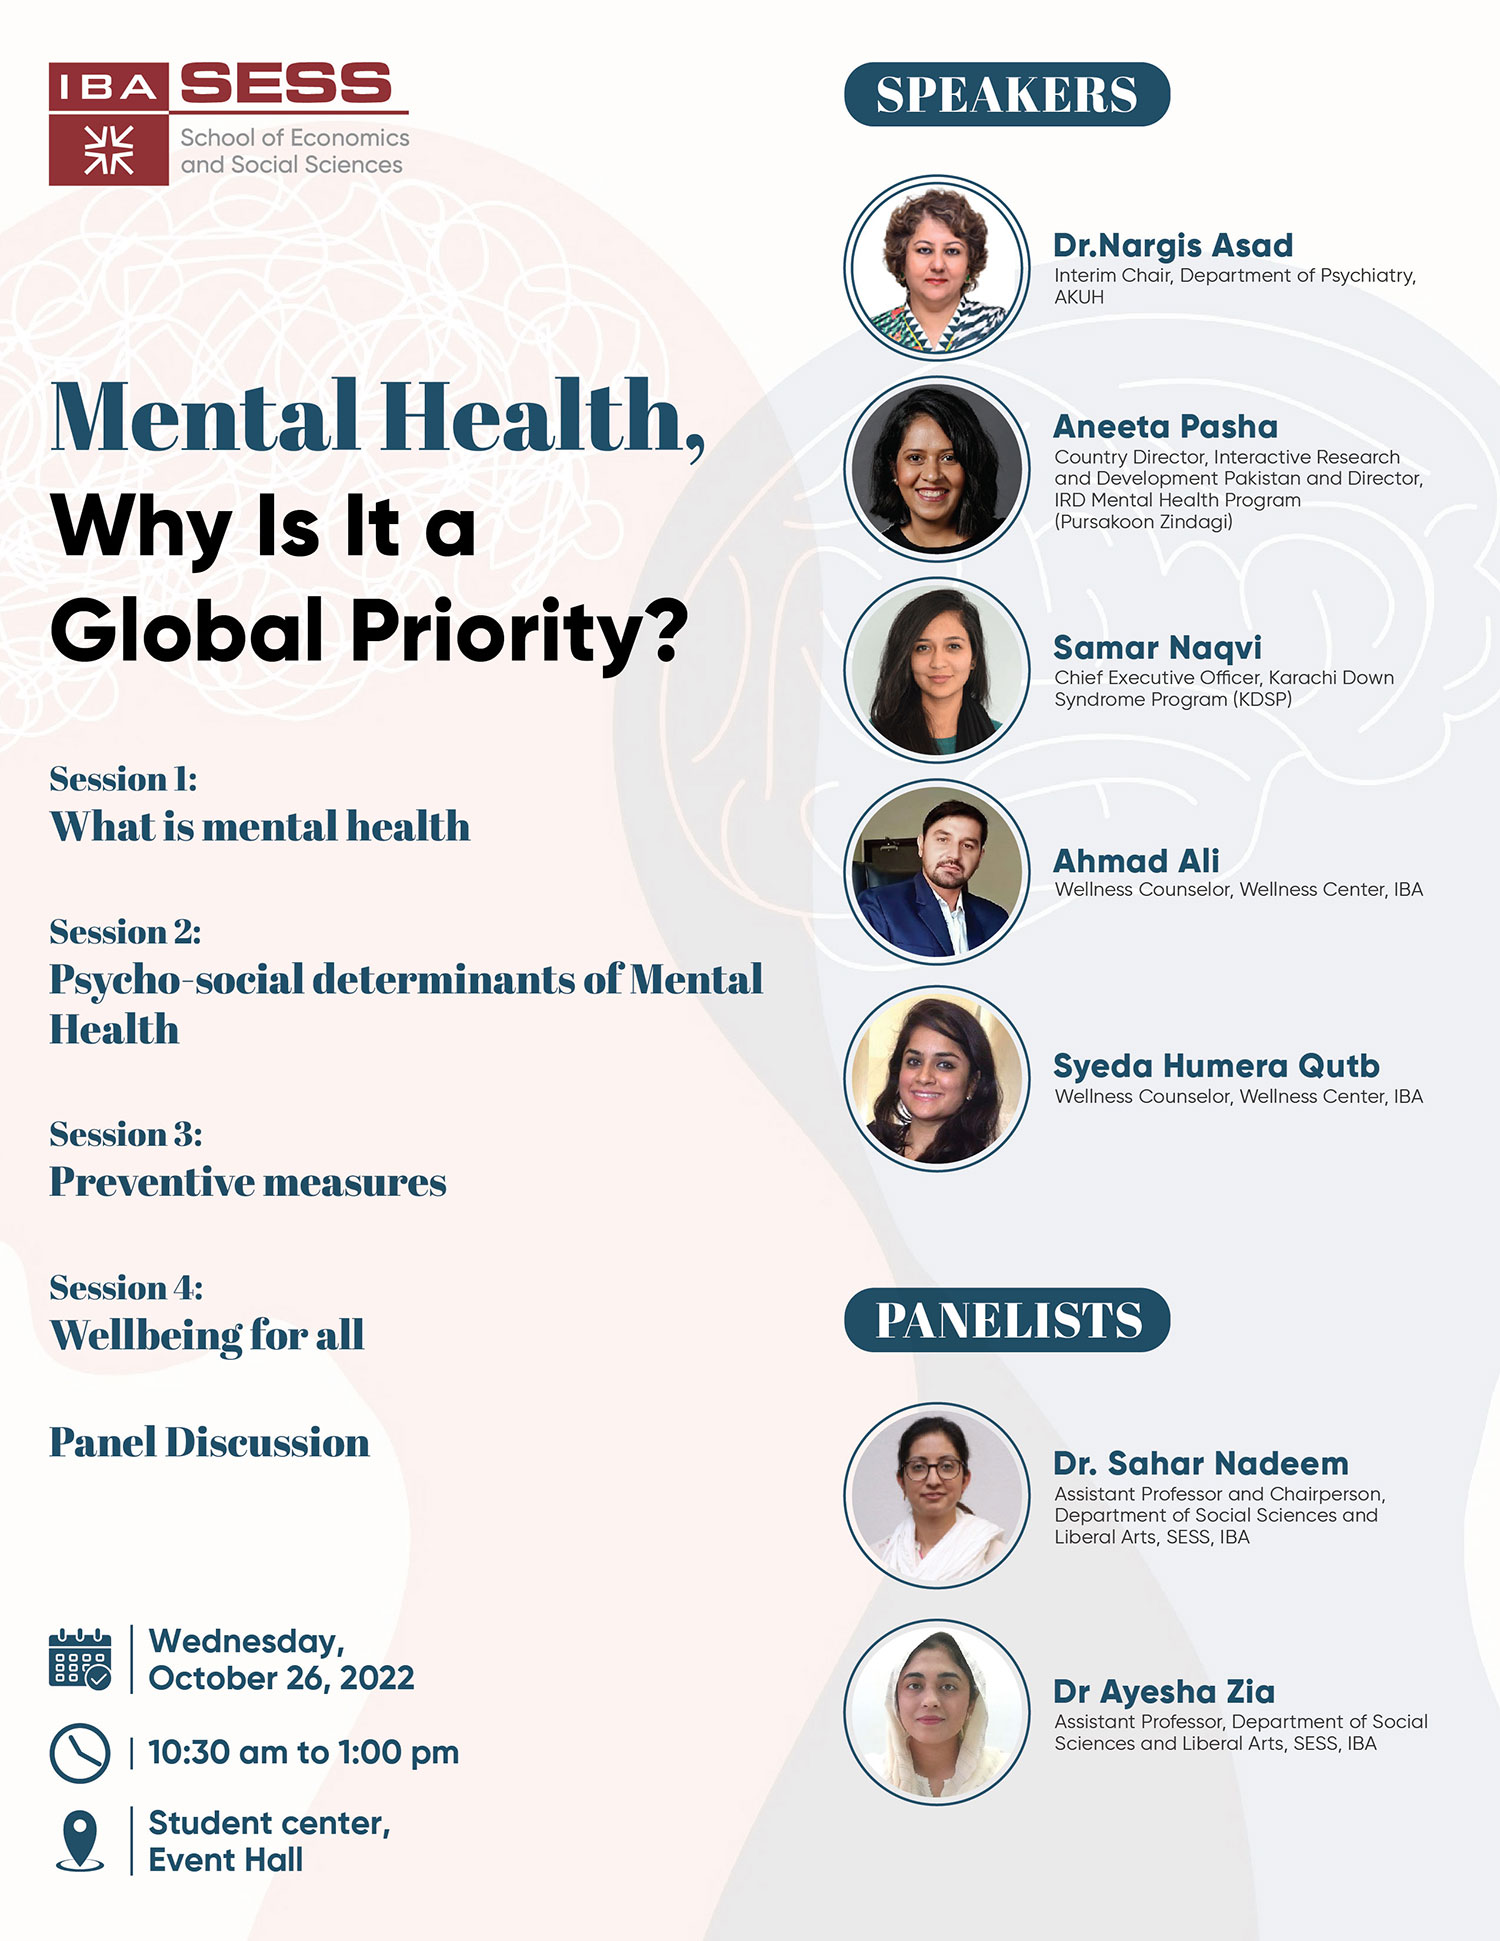 Mental Health, Why is it a Global Priority